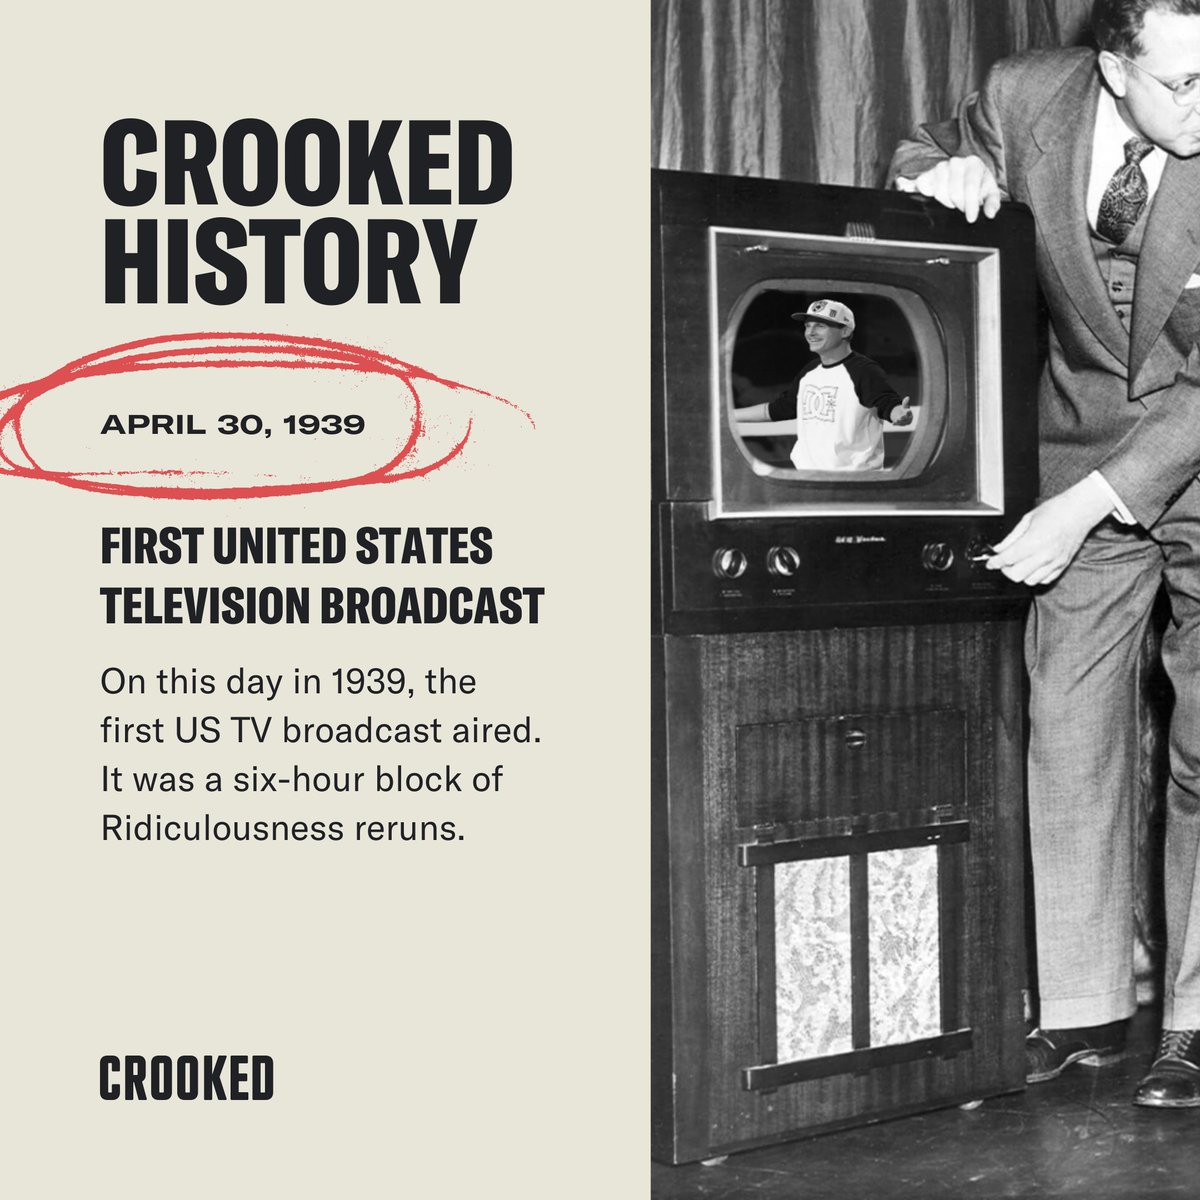 Before that, people had to listen to Ridiculousness on the radio.
#CrookedMedia #CrookedHistory #TV